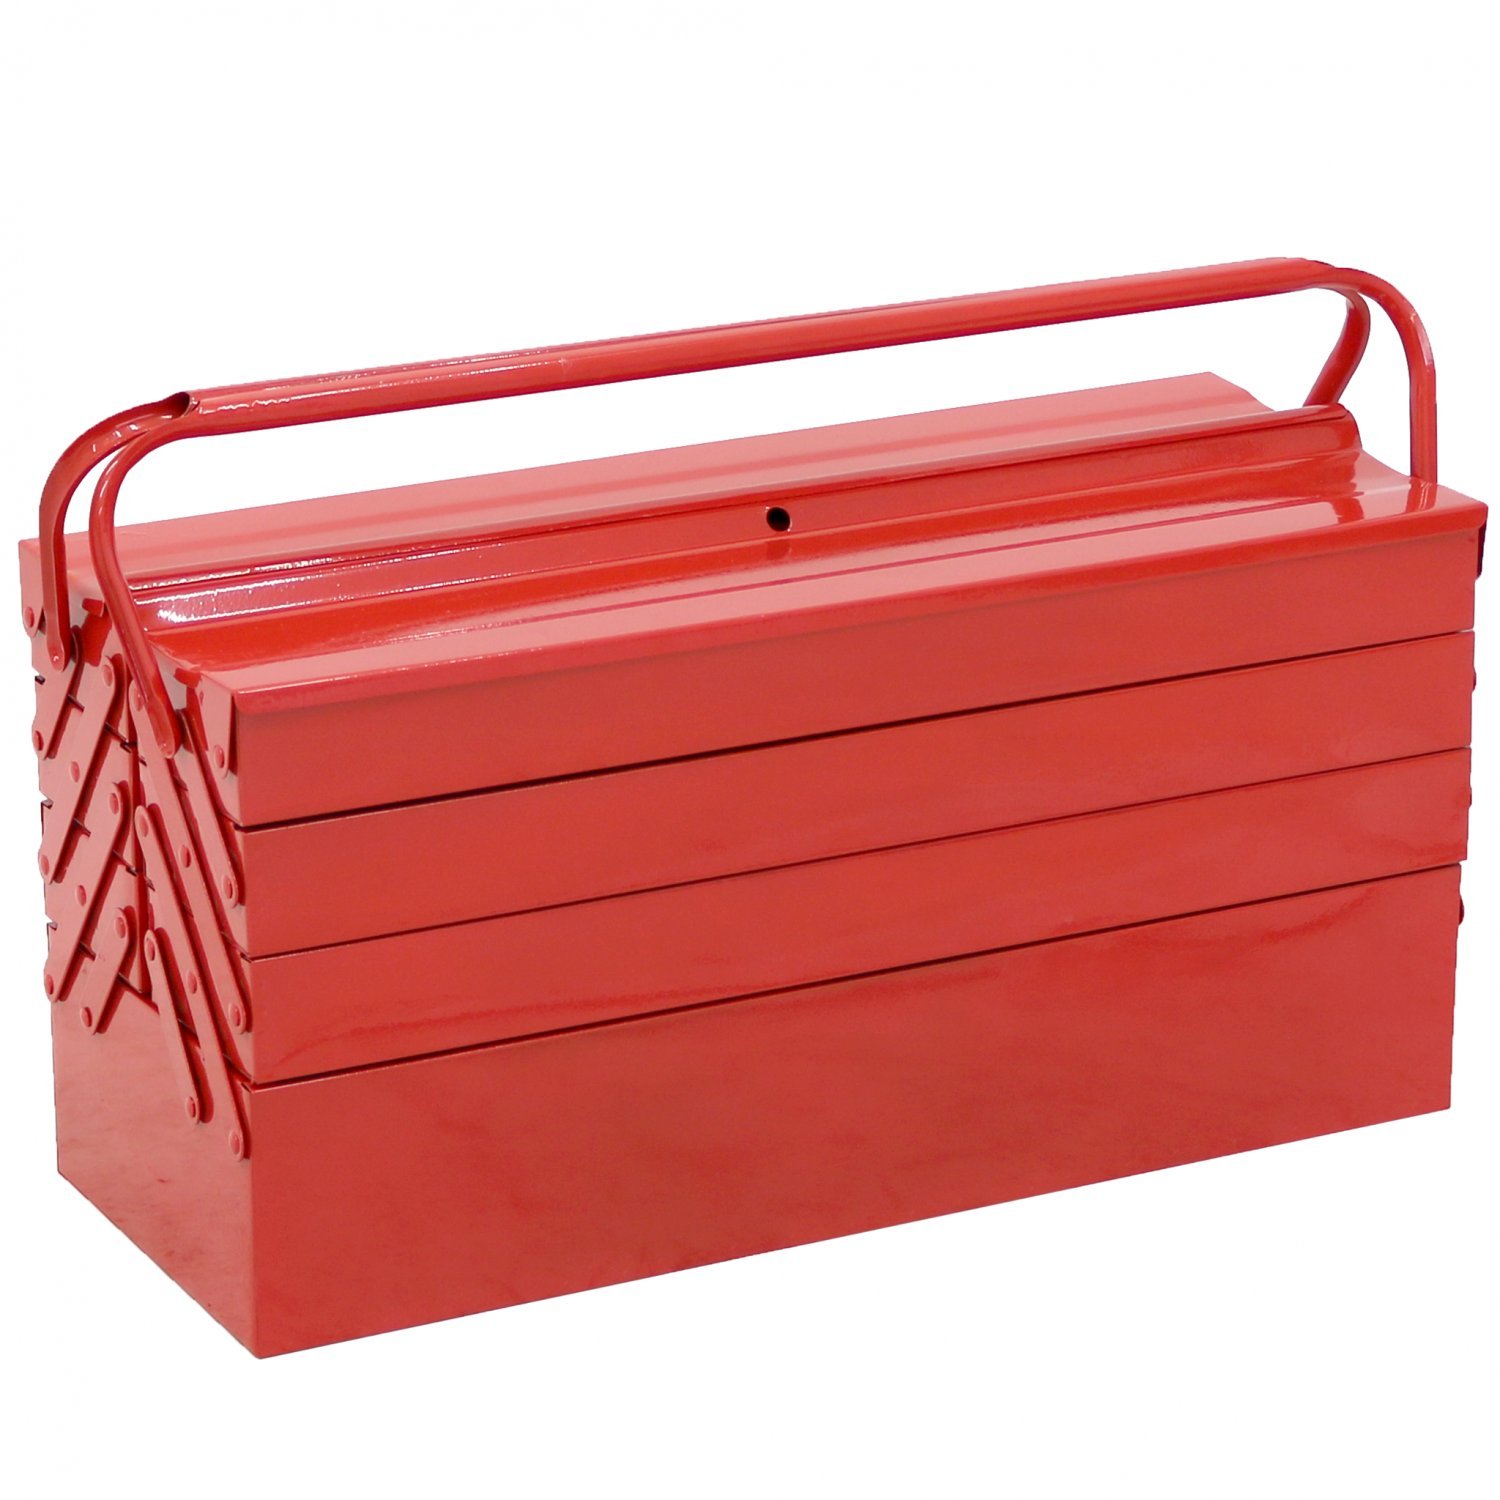 LARGE RED METAL Storage Cantilever TOOLBOX ORGANISER 4 Tier 7 Tray 530MM 